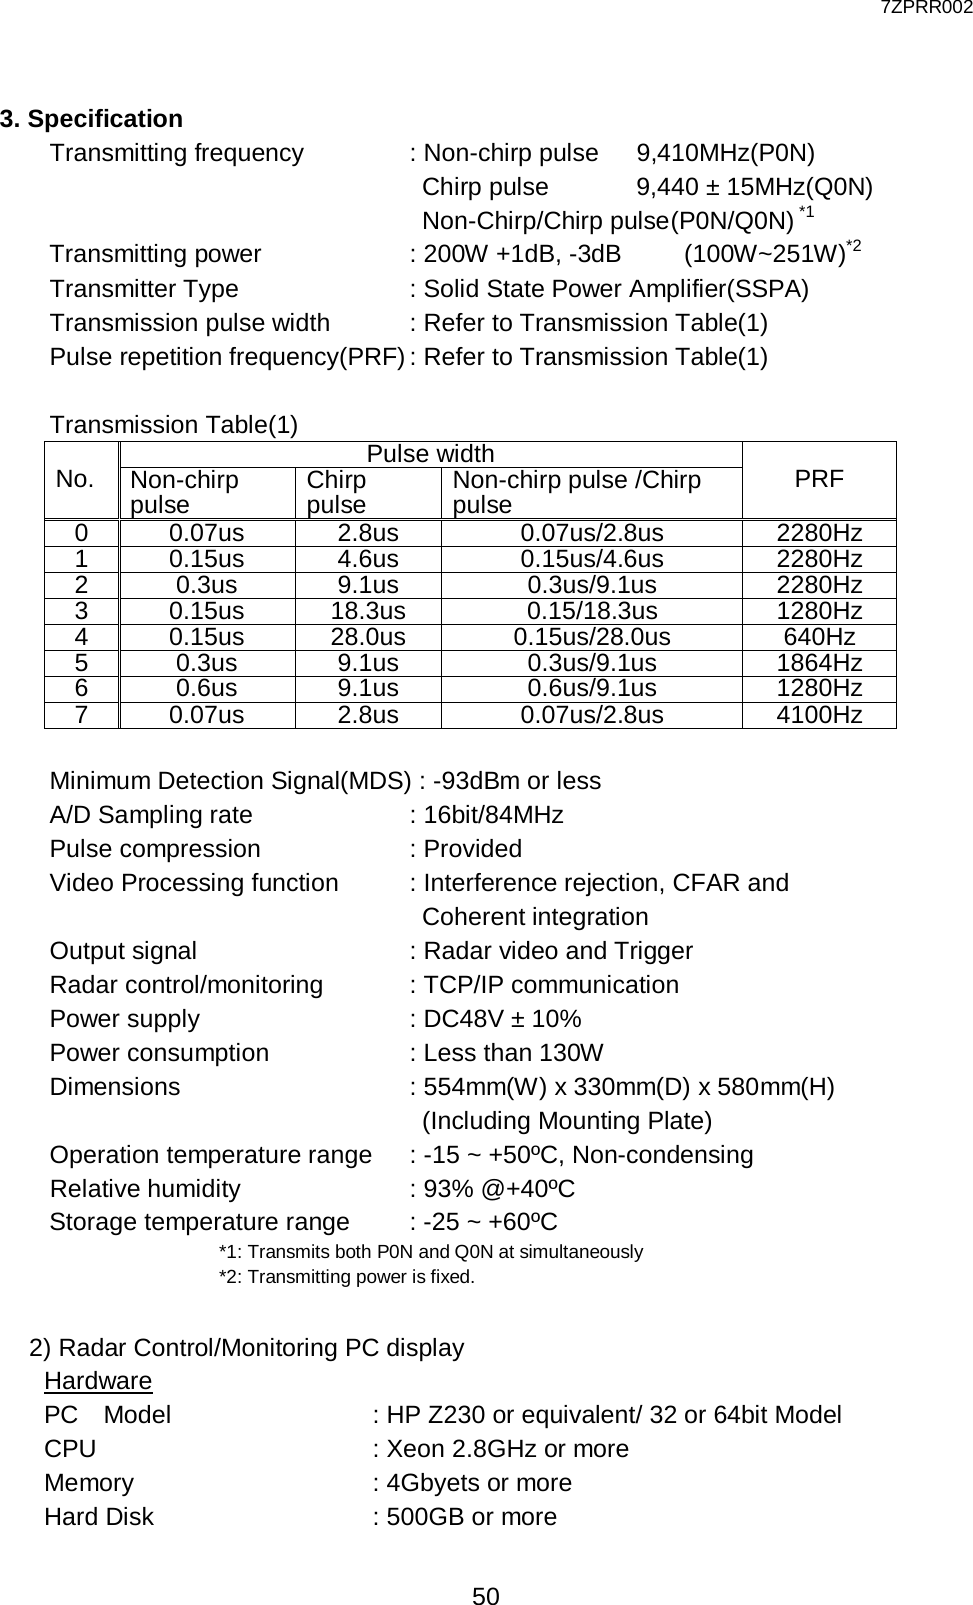  7ZPRR002 50  3. Specification   Transmitting frequency      : Non-chirp pulse     9,410MHz(P0N)                           Chirp pulse       9,440 ± 15MHz(Q0N)                           Non-Chirp/Chirp pulse (P0N/Q0N) *1     Transmitting power        : 200W +1dB, -3dB   (100W~251W)*2     Transmitter Type          : Solid State Power Amplifier(SSPA)     Transmission pulse width     : Refer to Transmission Table(1)    Pulse repetition frequency(PRF) : Refer to Transmission Table(1)  Transmission Table(1) No. Pulse width PRF Non-chirp pulse Chirp pulse Non-chirp pulse /Chirp pulse 0 0.07us 2.8us 0.07us/2.8us 2280Hz 1 0.15us 4.6us 0.15us/4.6us 2280Hz 2 0.3us 9.1us 0.3us/9.1us 2280Hz 3 0.15us 18.3us 0.15/18.3us 1280Hz 4 0.15us 28.0us 0.15us/28.0us 640Hz 5 0.3us 9.1us 0.3us/9.1us 1864Hz 6 0.6us 9.1us 0.6us/9.1us 1280Hz 7 0.07us 2.8us 0.07us/2.8us 4100Hz      Minimum Detection Signal(MDS) : -93dBm or less     A/D Sampling rate         : 16bit/84MHz     Pulse compression        : Provided     Video Processing function    : Interference rejection, CFAR and                         Coherent integration     Output signal            : Radar video and Trigger     Radar control/monitoring      : TCP/IP communication     Power supply            : DC48V ± 10%     Power consumption        : Less than 130W     Dimensions             : 554mm(W) x 330mm(D) x 580mm(H)                             (Including Mounting Plate)     Operation temperature range   : -15 ~ +50ºC, Non-condensing Relative humidity          : 93% @+40ºC     Storage temperature range    : -25 ~ +60ºC *1: Transmits both P0N and Q0N at simultaneously *2: Transmitting power is fixed.  2) Radar Control/Monitoring PC display Hardware PC  Model            : HP Z230 or equivalent/ 32 or 64bit Model CPU                 : Xeon 2.8GHz or more Memory         : 4Gbyets or more   Hard Disk              : 500GB or more 